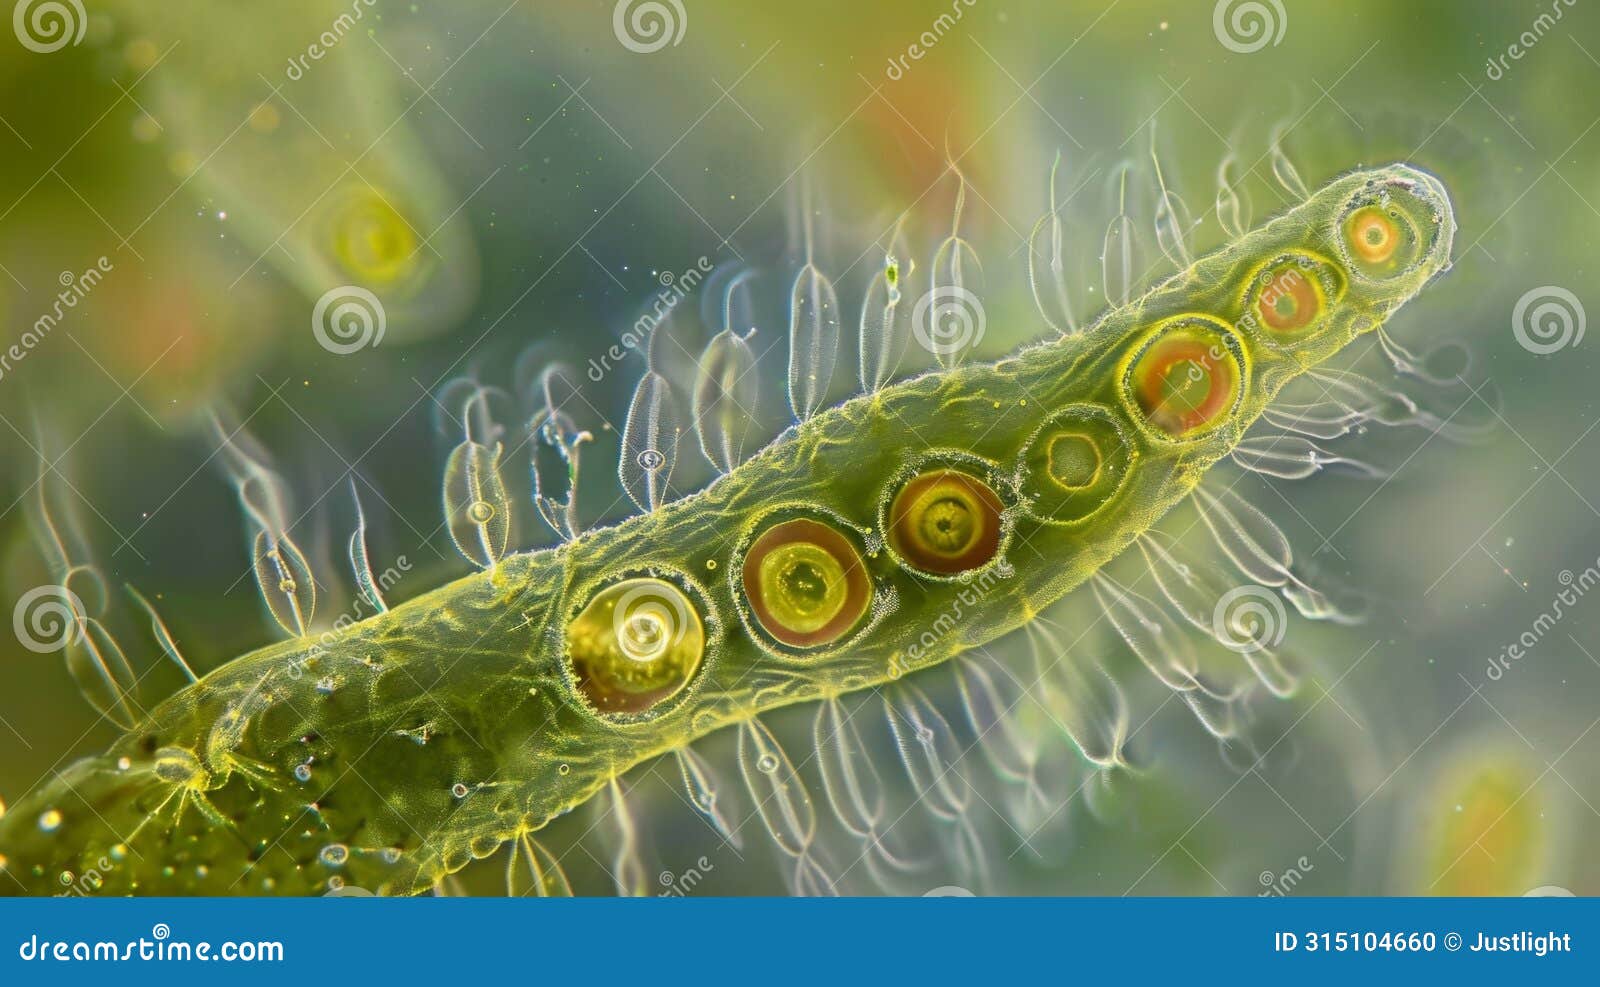 a tiny singlecelled algal organism magnified to show the intricate details of its flagella and chloroplasts. .